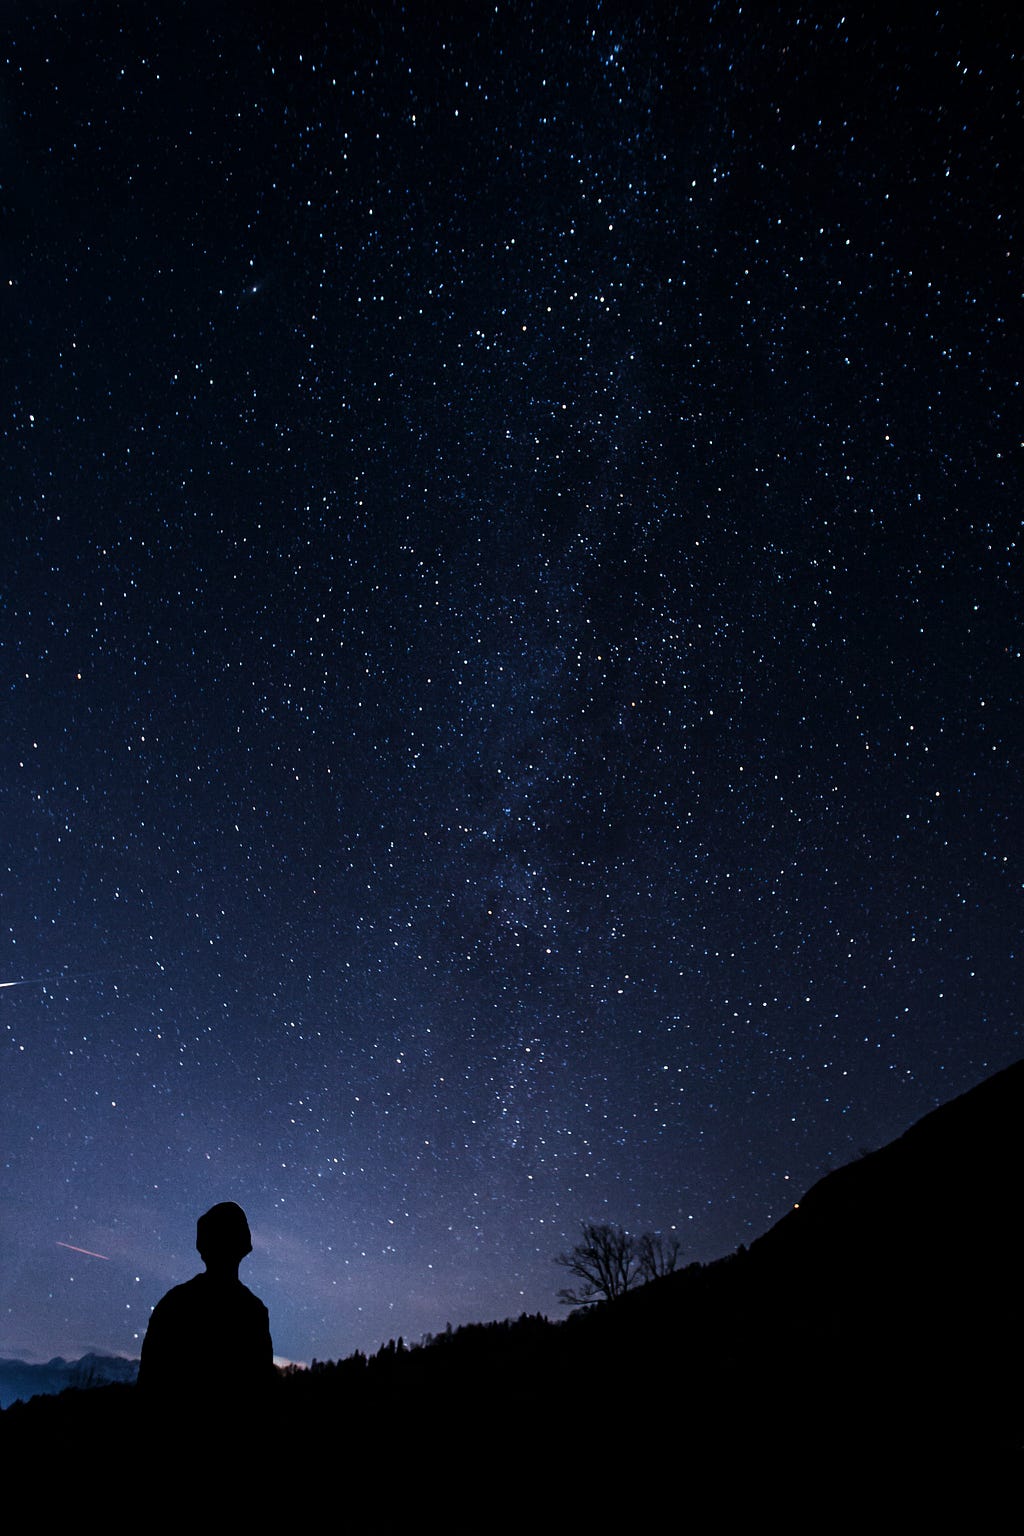 A man looking up at the stars